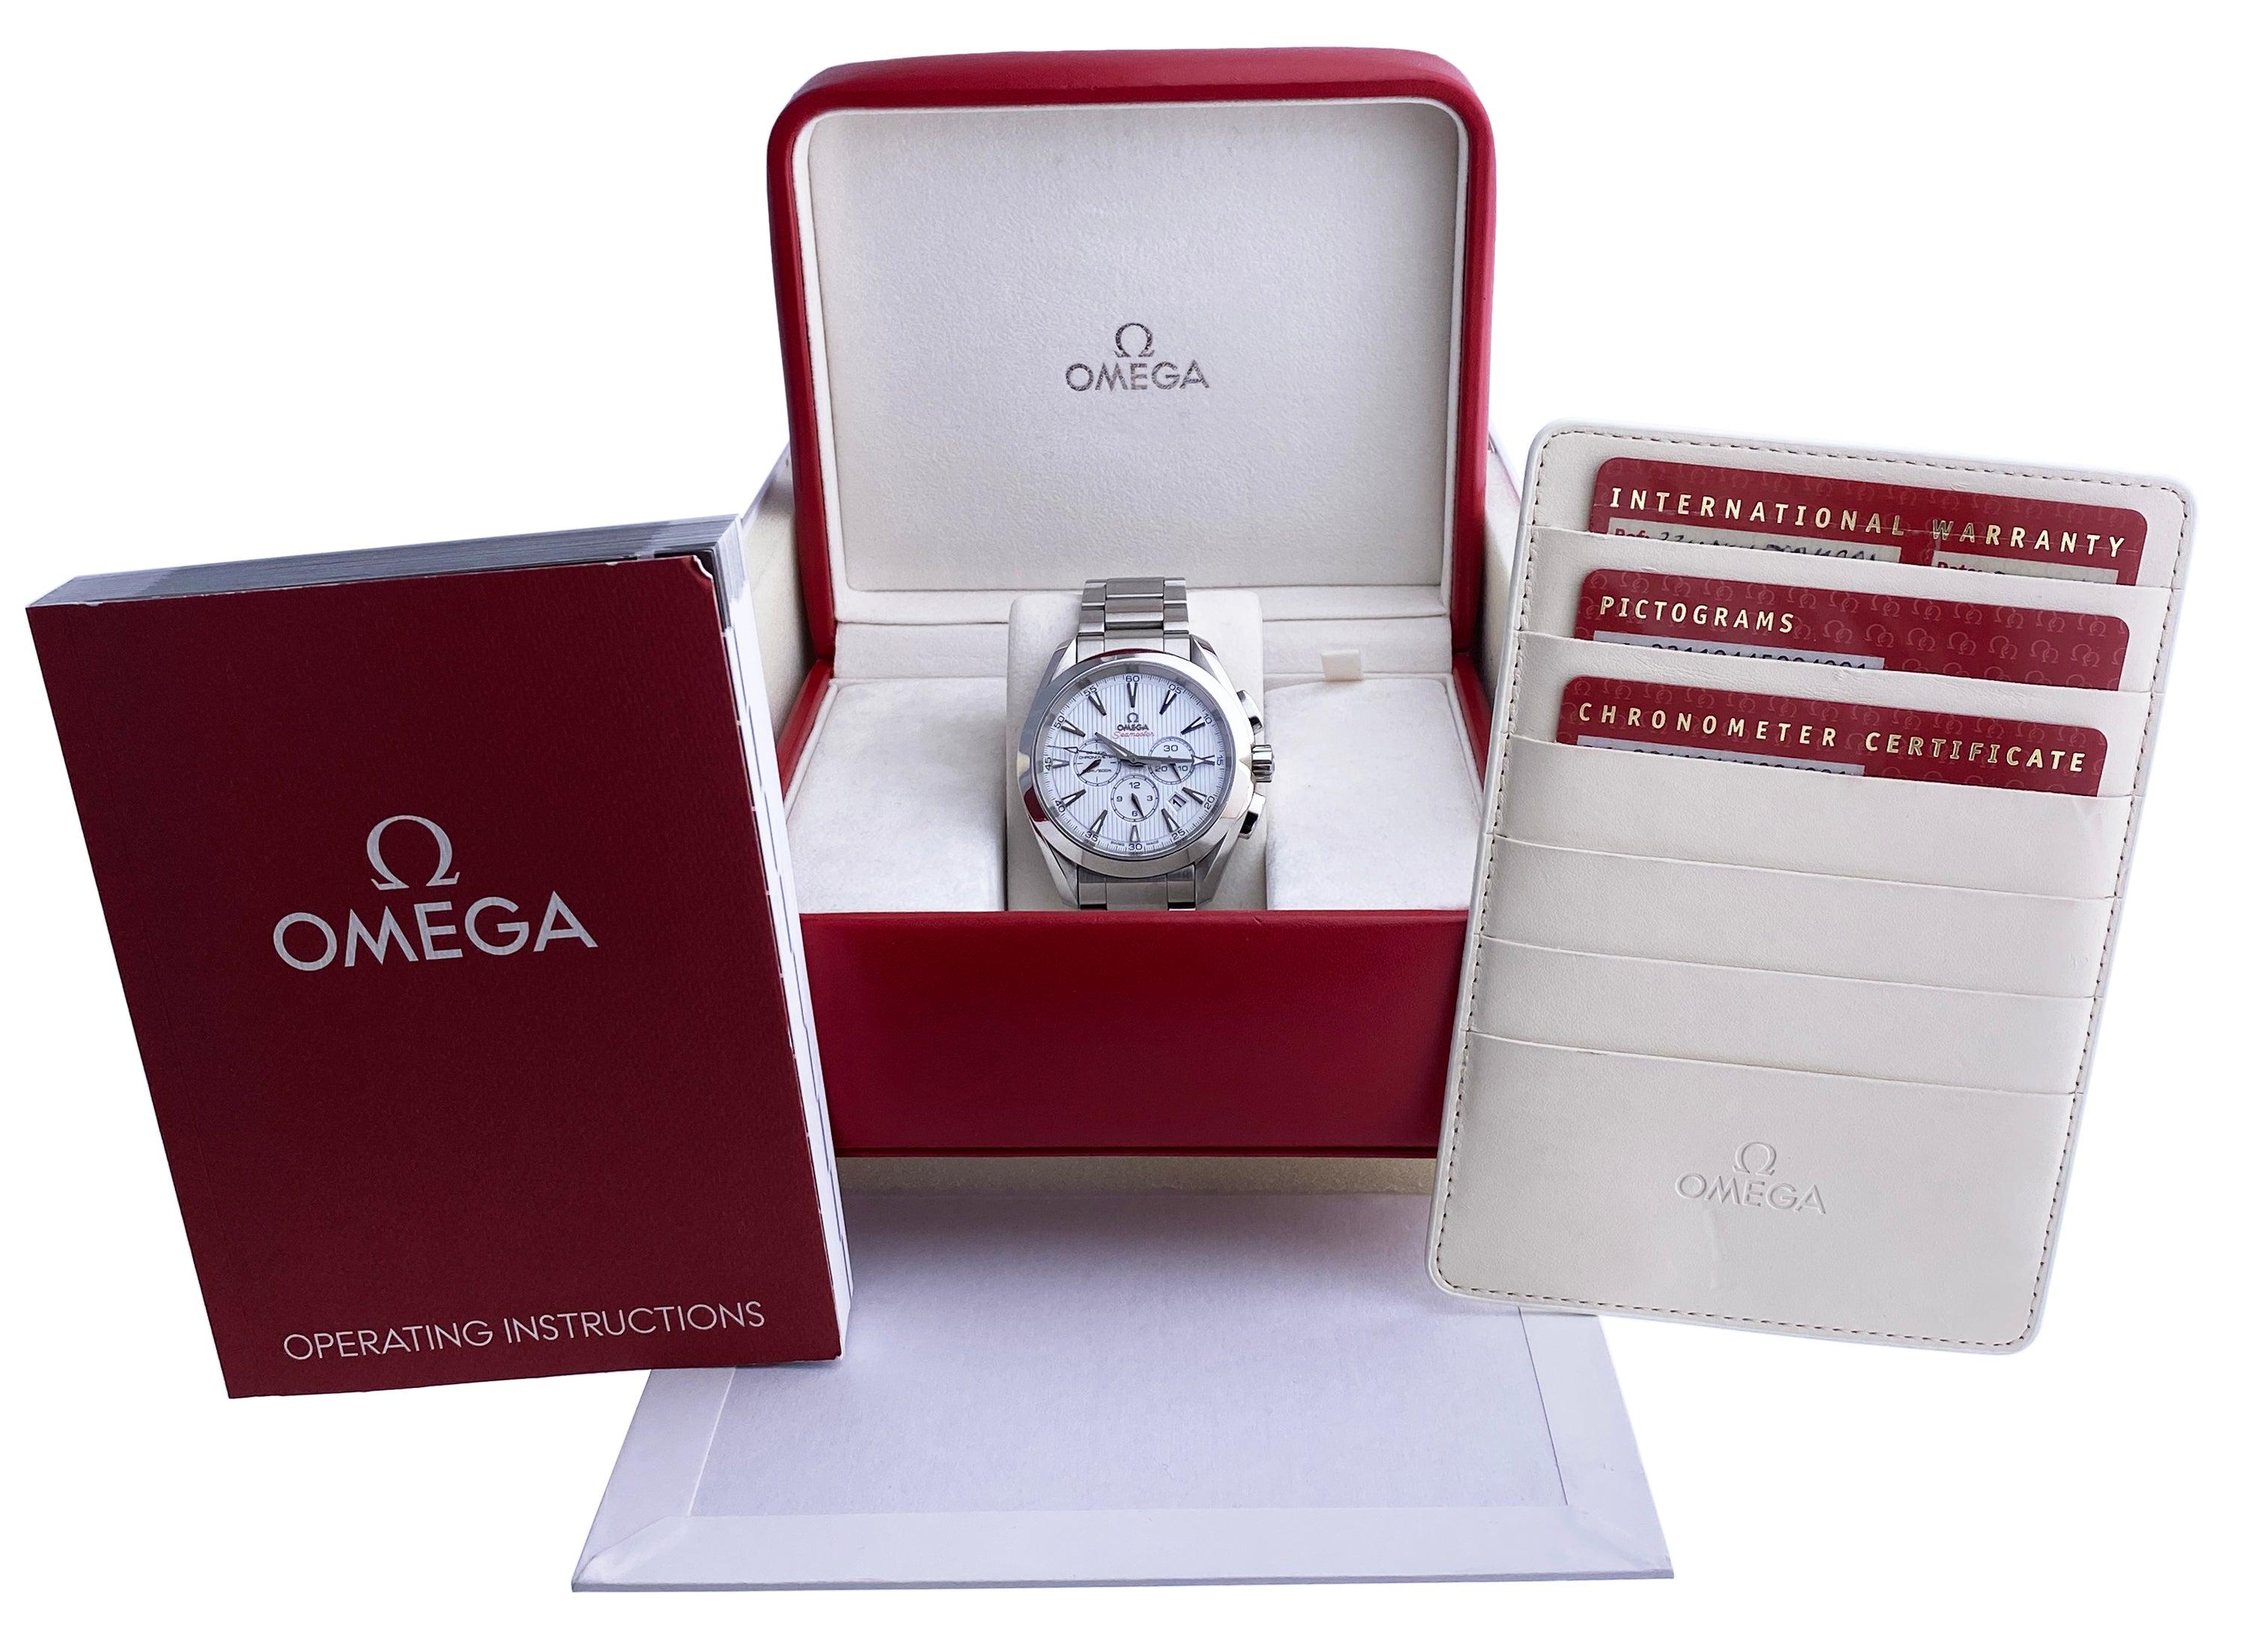 Omega Seamaster Aqua Terra 231.10.44.50.04.001  Mens Watch. 44 mm stainless steel case. Stainless steel fixed bezel. White dial with luminous steel hands and index hour markers. Date display between 4 and 5 o'clock position. Three chronograph